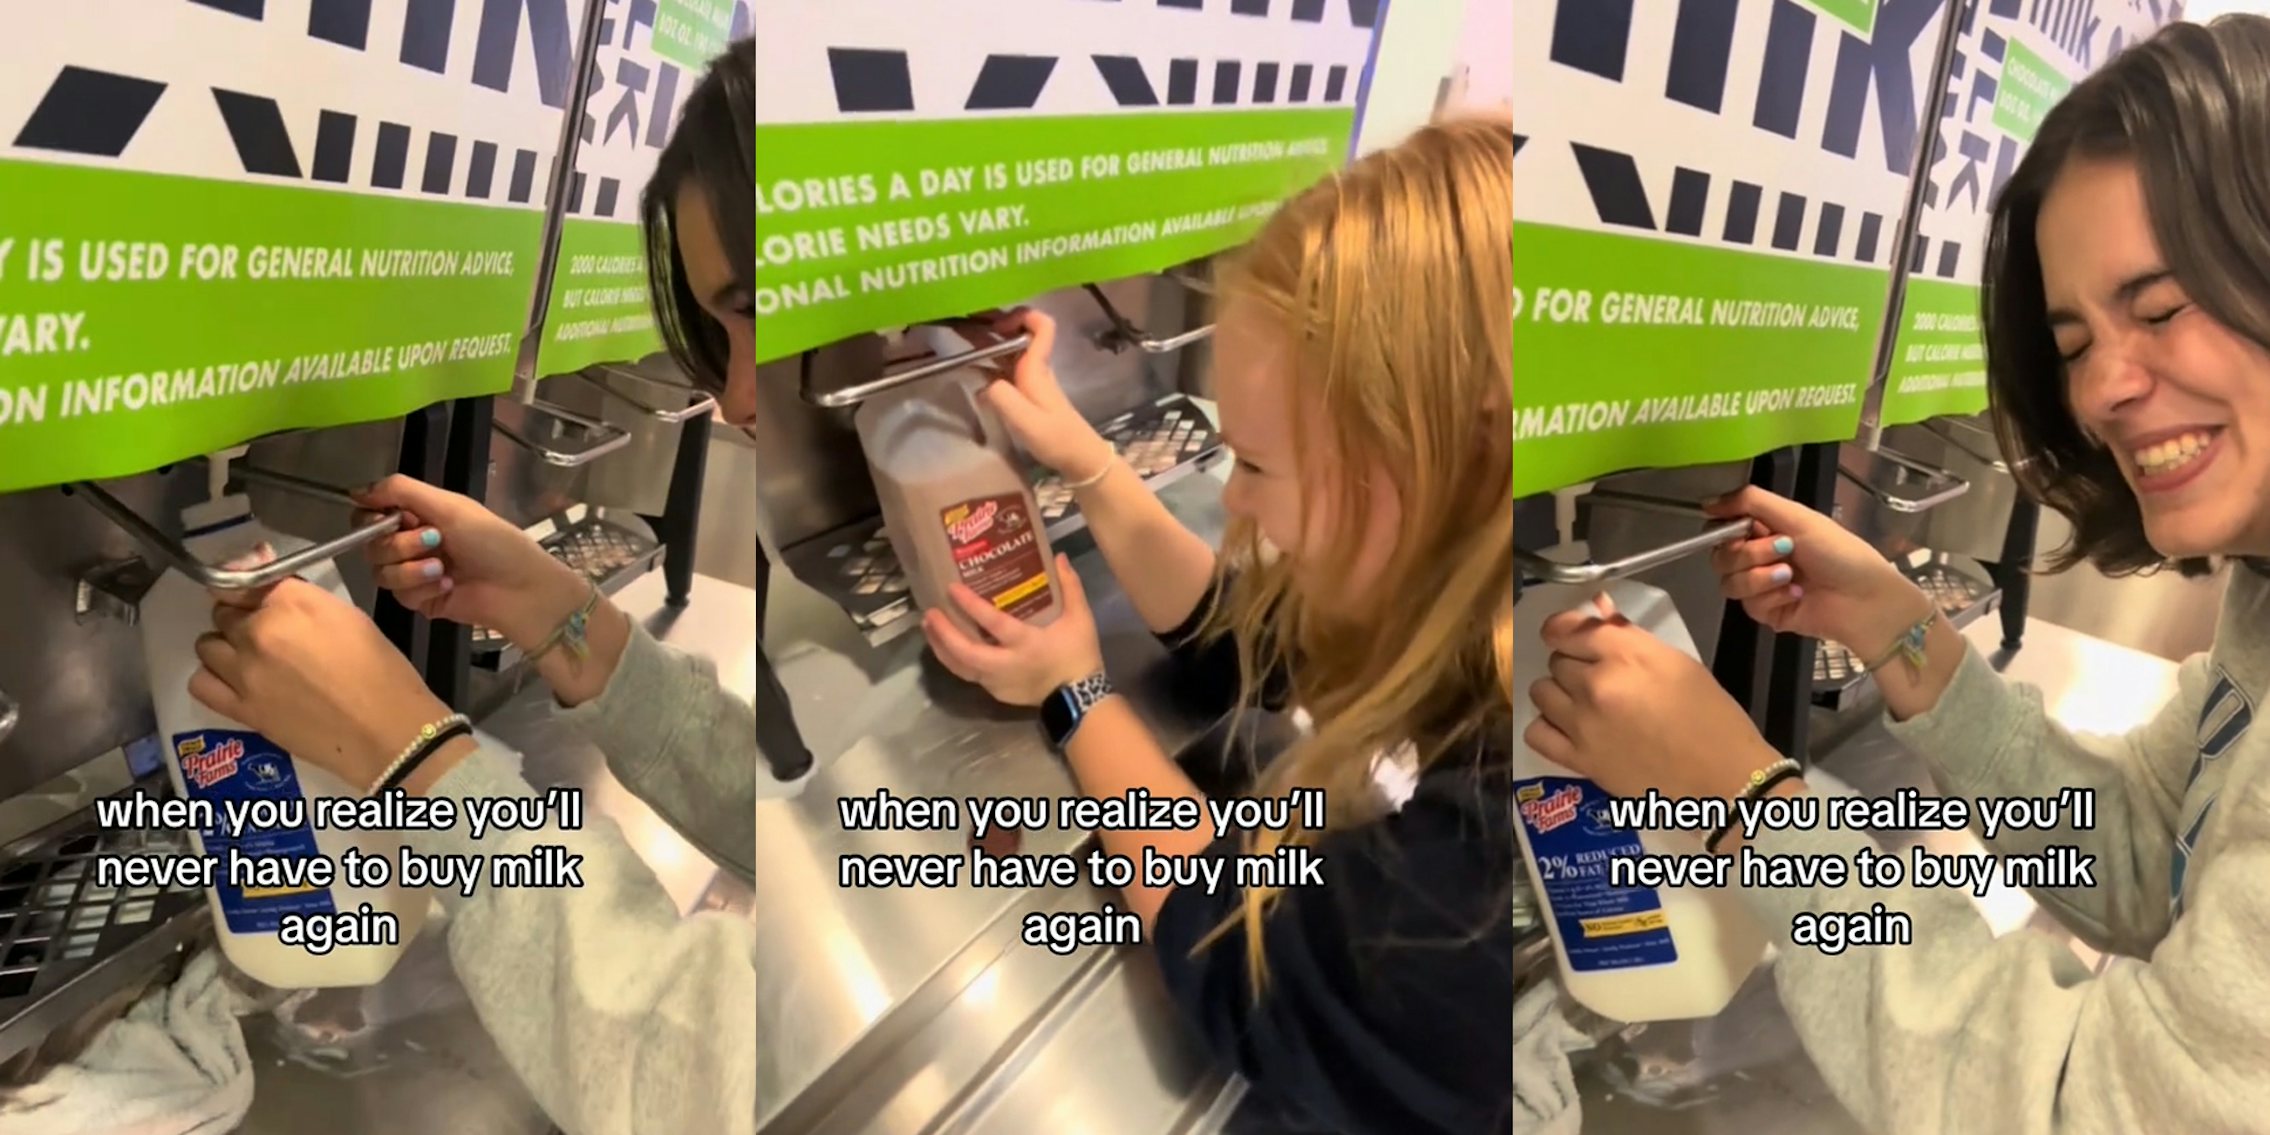 college student filling milk jug with caption 'when you realize you'll never have to buy milk again' (l) college student filling milk jug with caption 'when you realize you'll never have to buy milk again' (c) college student filling milk jug with caption 'when you realize you'll never have to buy milk again' (r)